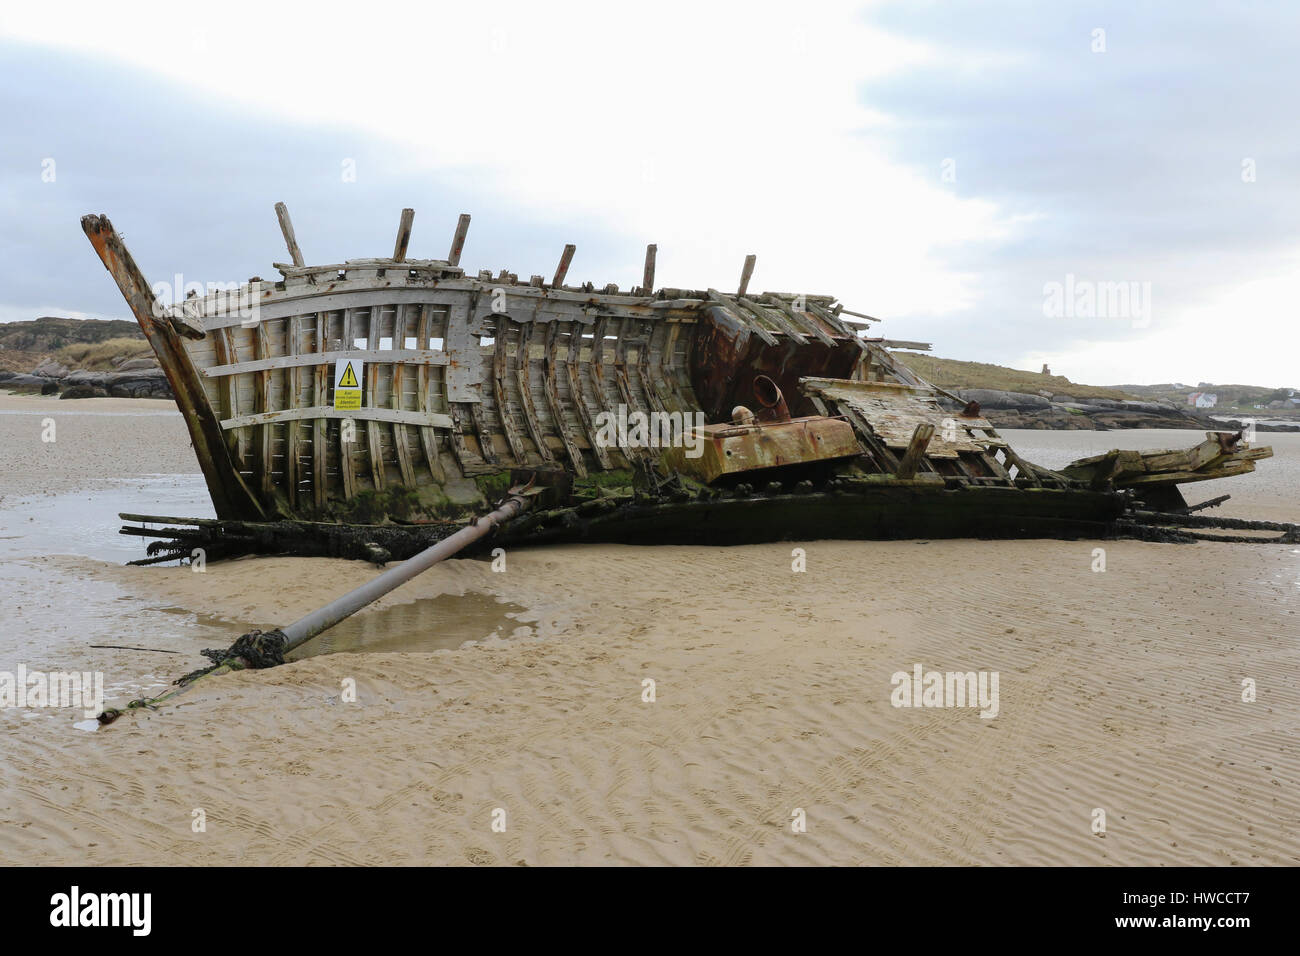 The wreck of a wooden fishing boat at Bunbeg, County Donegal, Ireland. The wreck is known as Bad Eddie's (fishing boat). Stock Photo